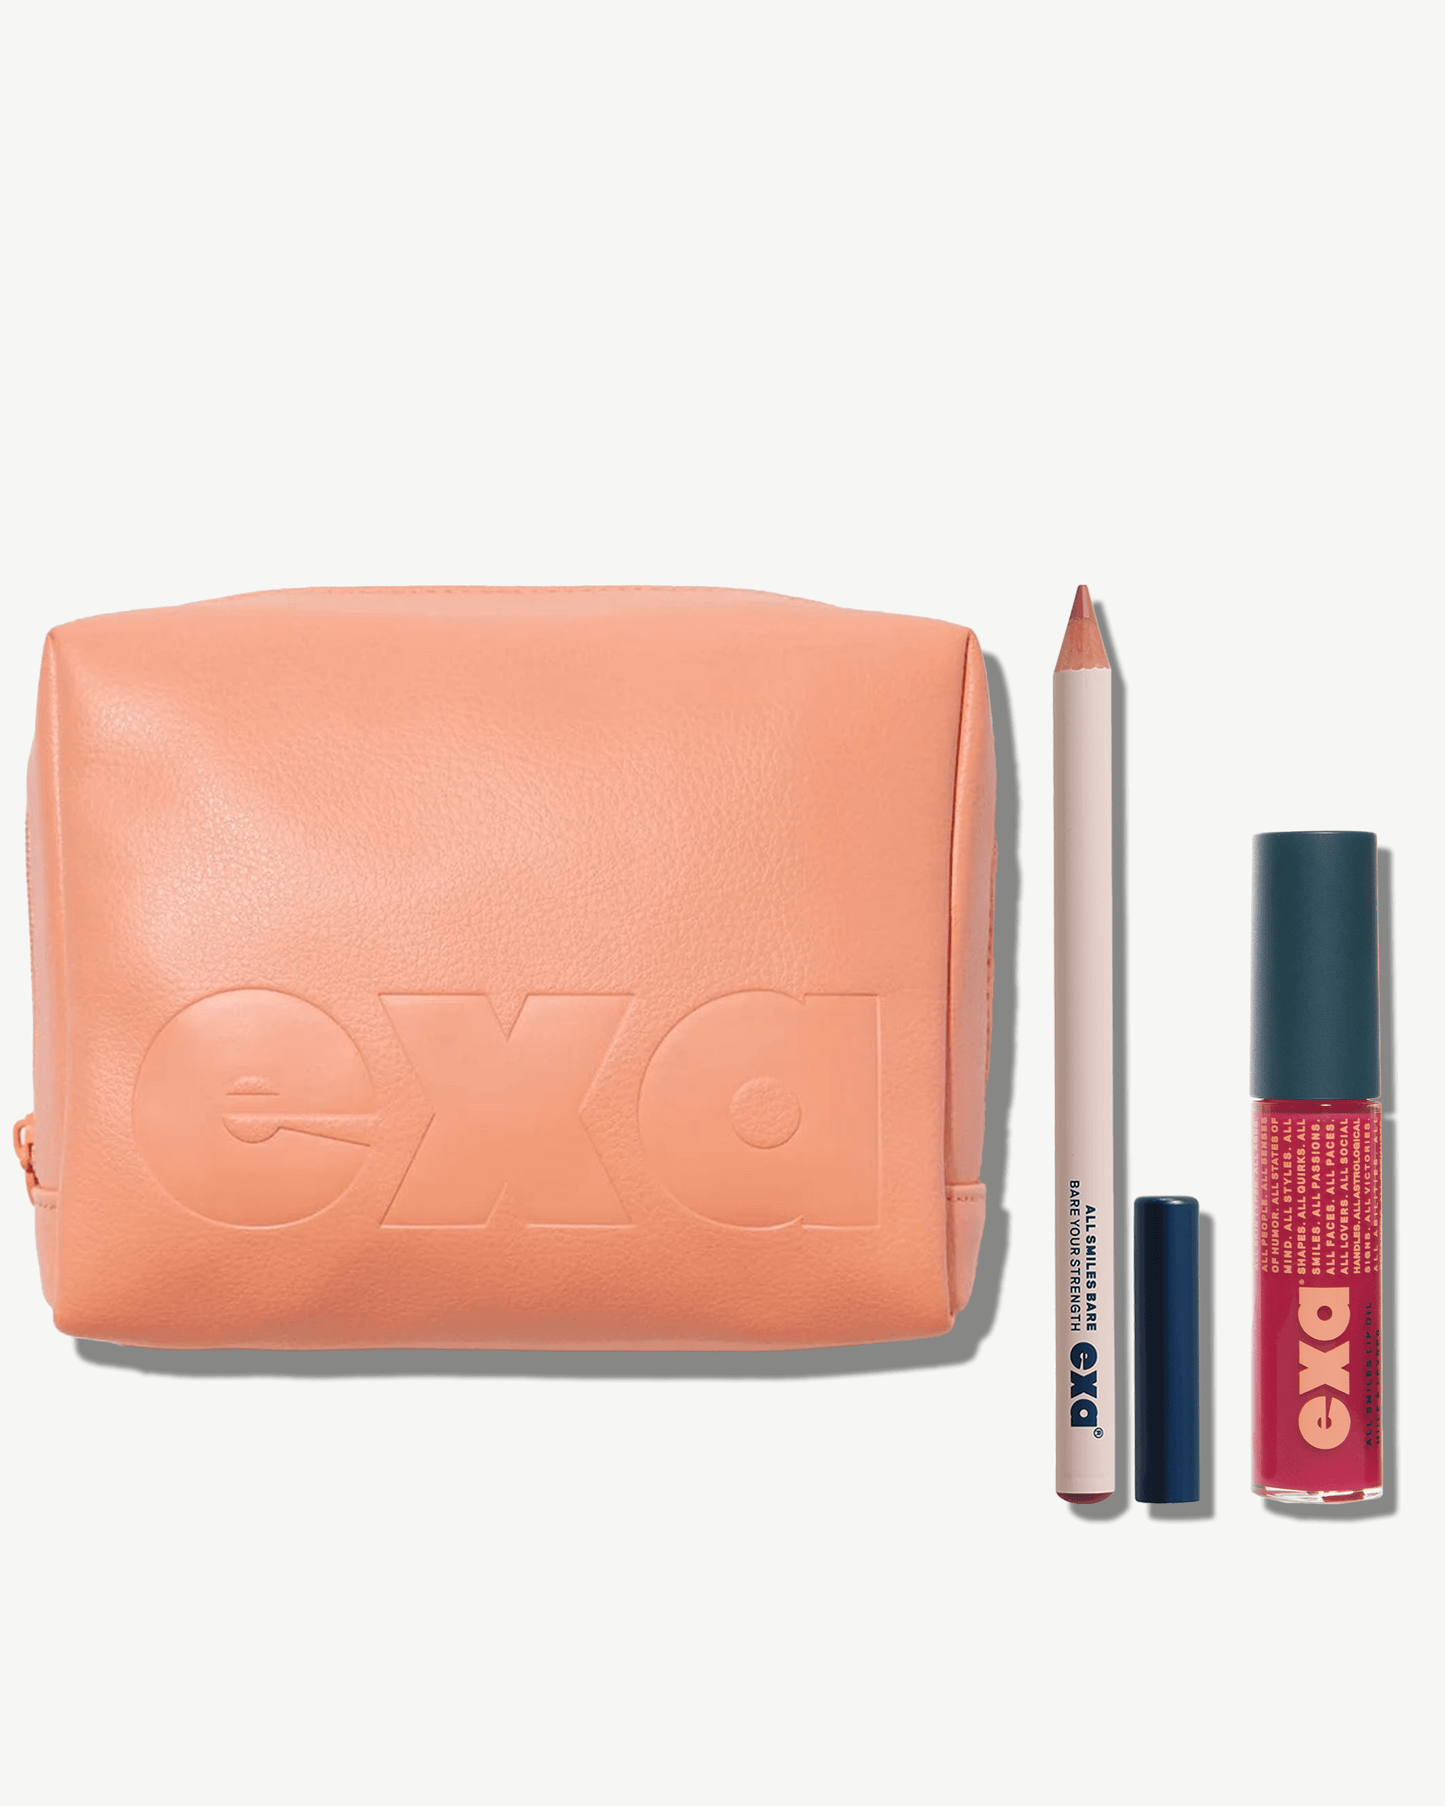 Exa All Smiles Bare Lip Liner in Strength, All Smiles Lip Oil in Lover, and All In Essential Makeup Bag